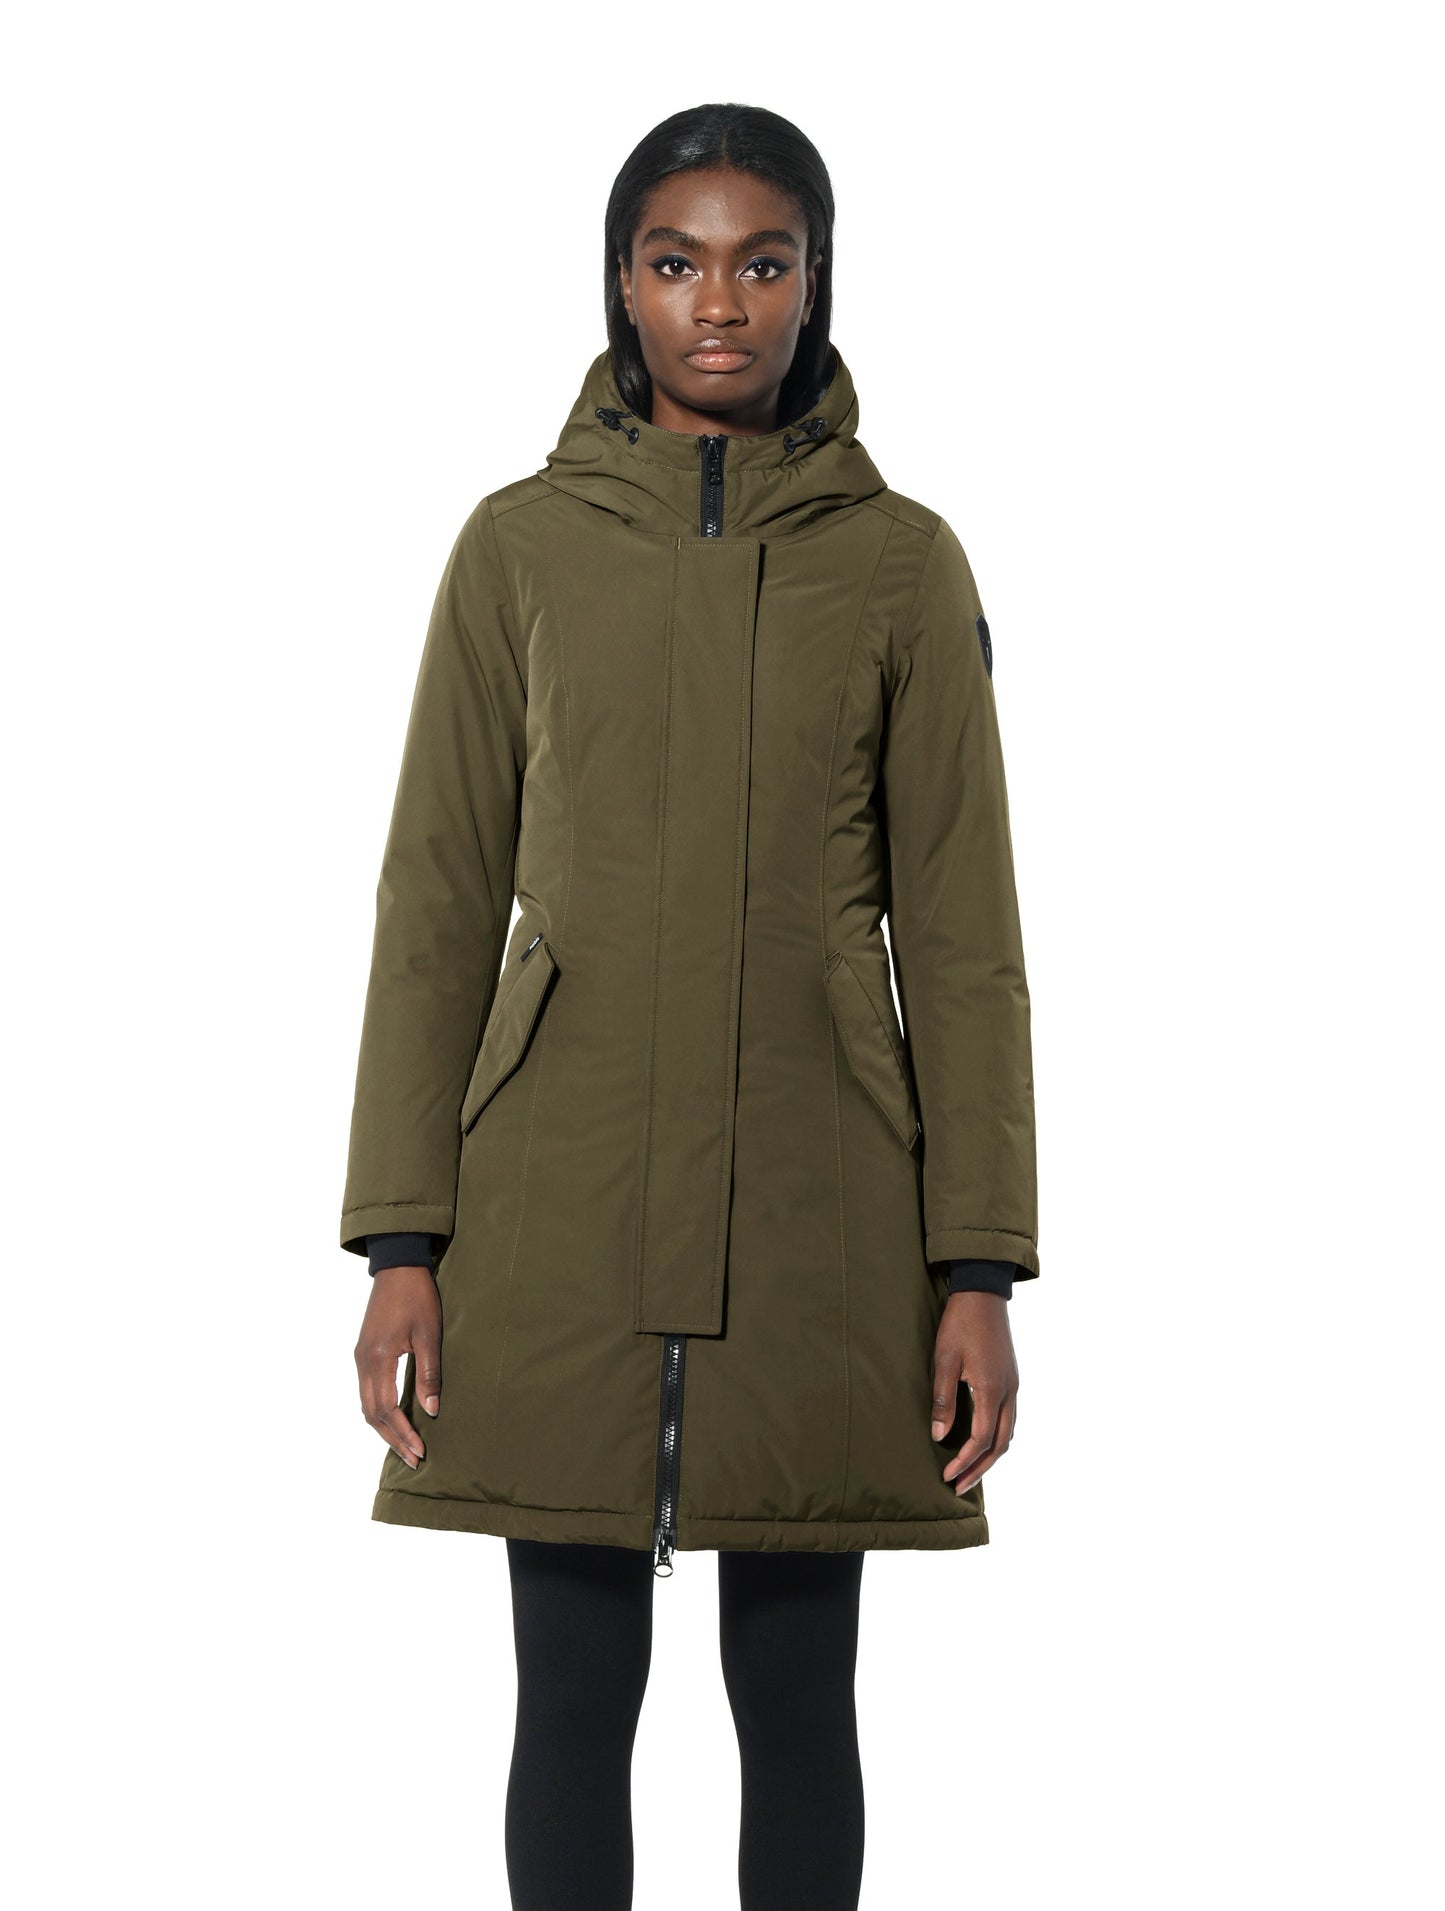 Ladies thigh length down-filled parka with non-removable hood in Fatigue